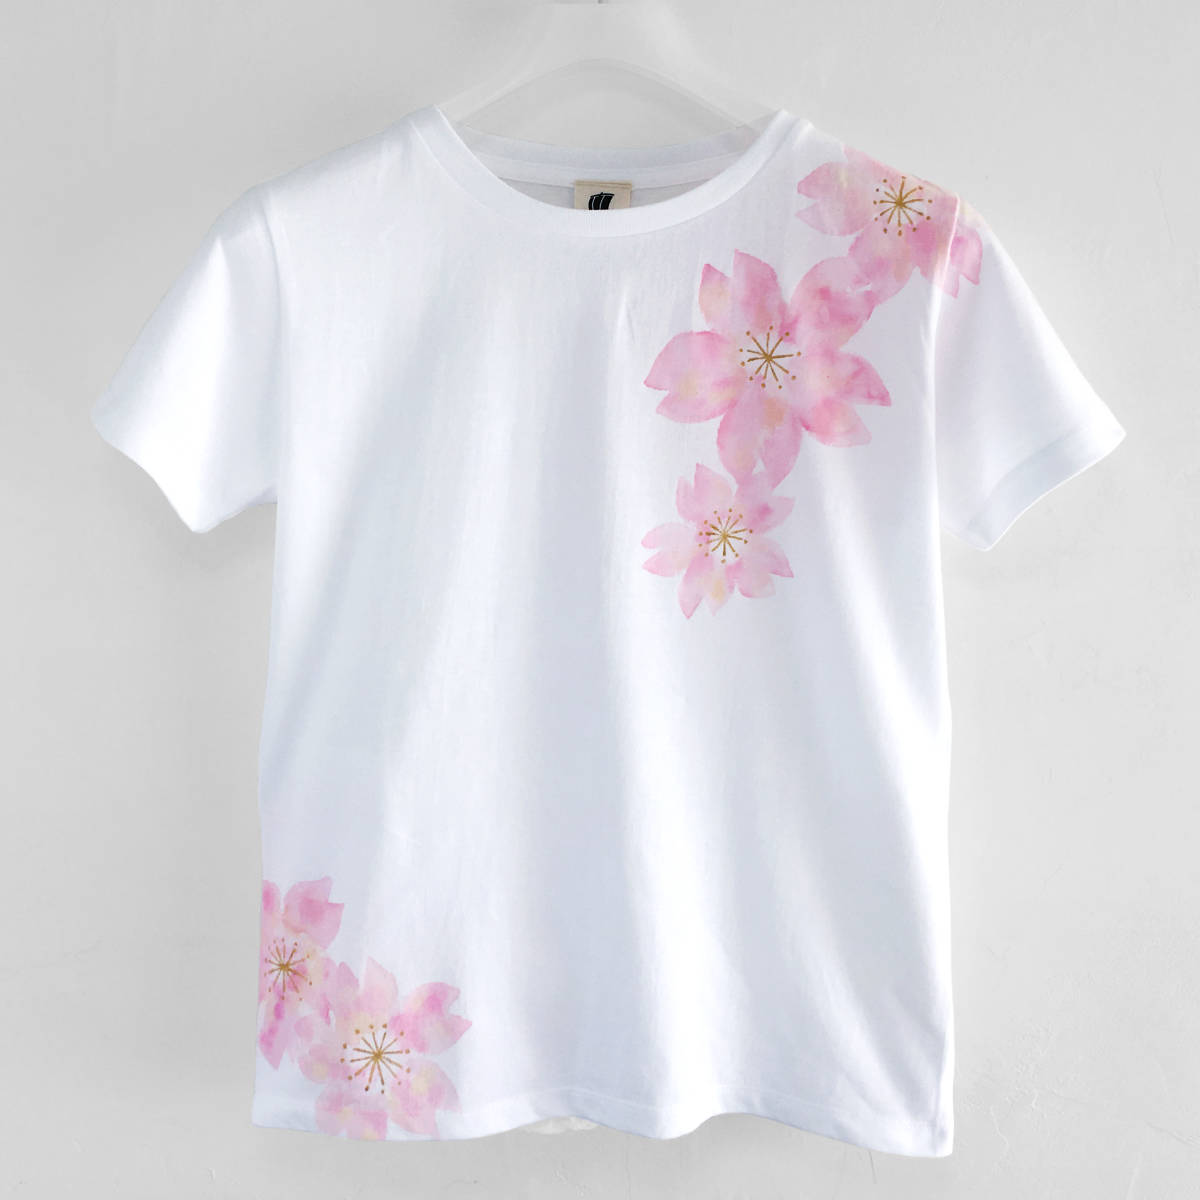 Dancing cherry blossom pattern T-shirt, cherry blossom color, women's M size, hand-drawn cherry blossom pattern T-shirt, summer, GM, Medium size, Crew neck, Patterned